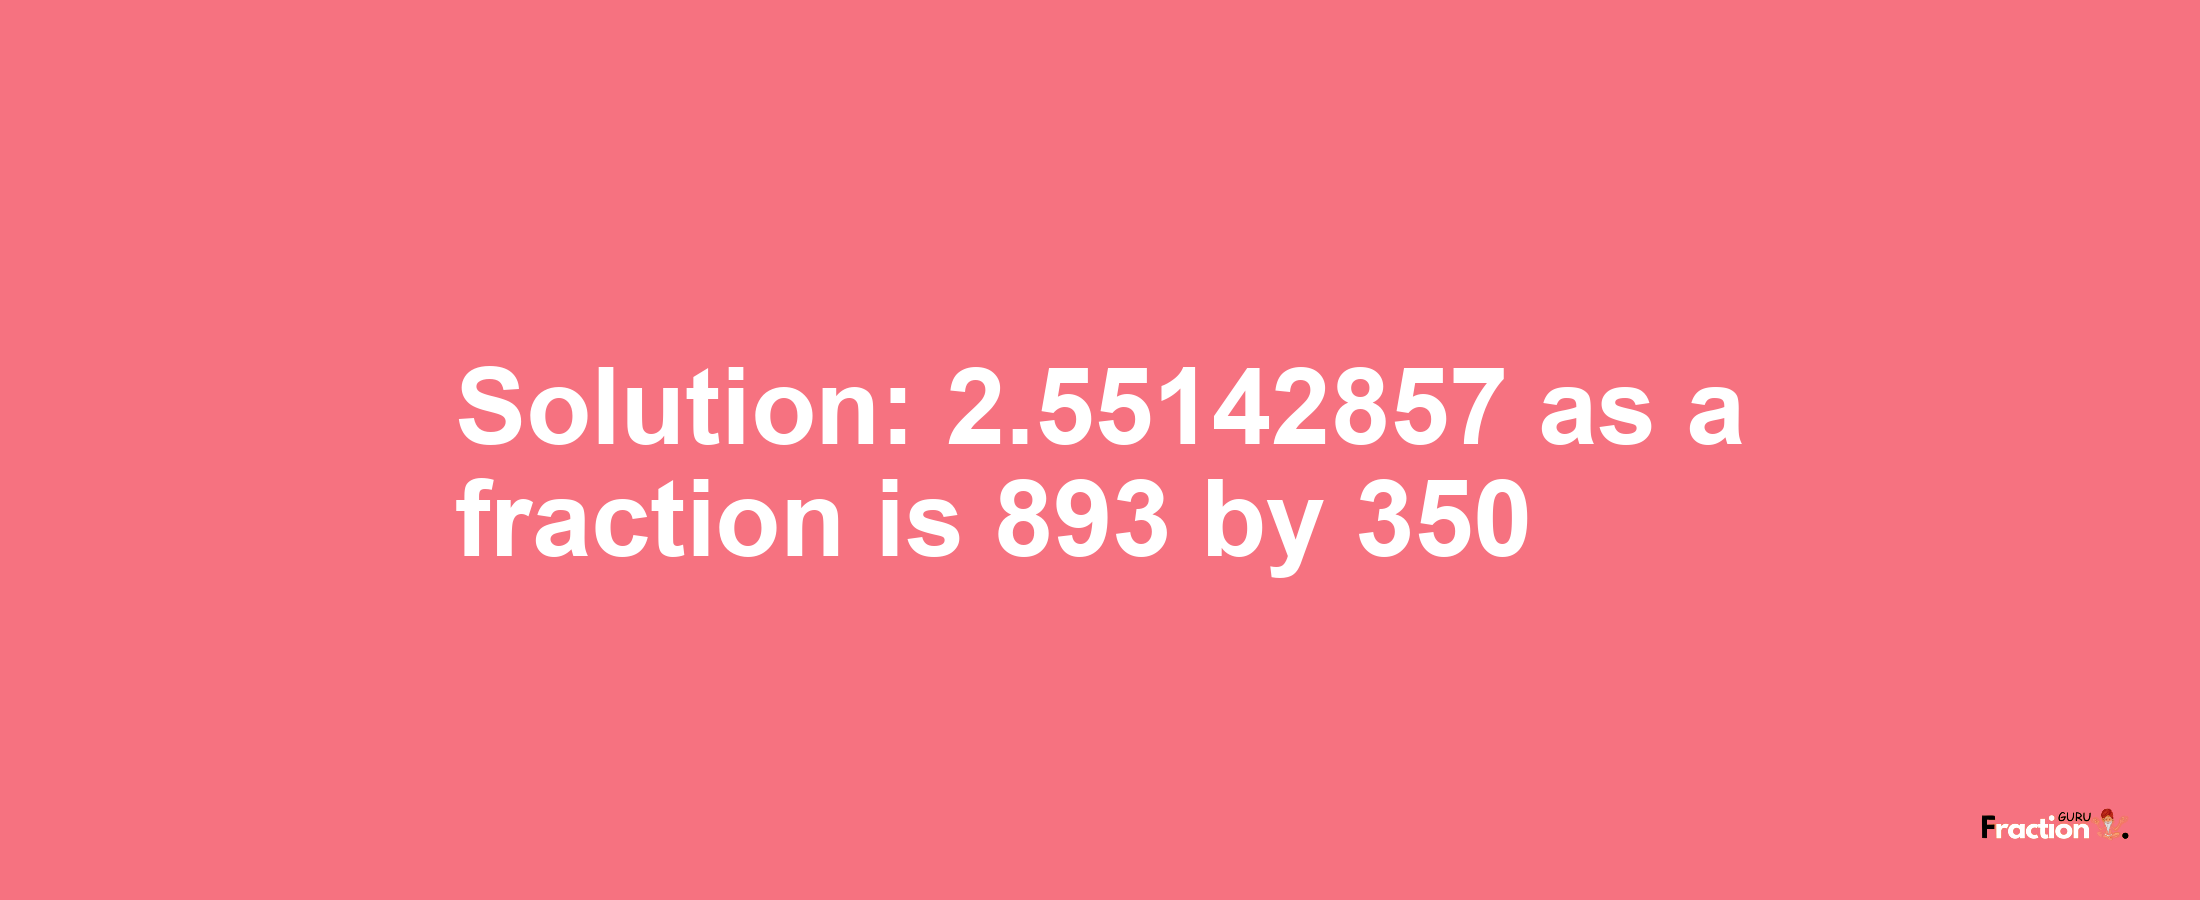 Solution:2.55142857 as a fraction is 893/350